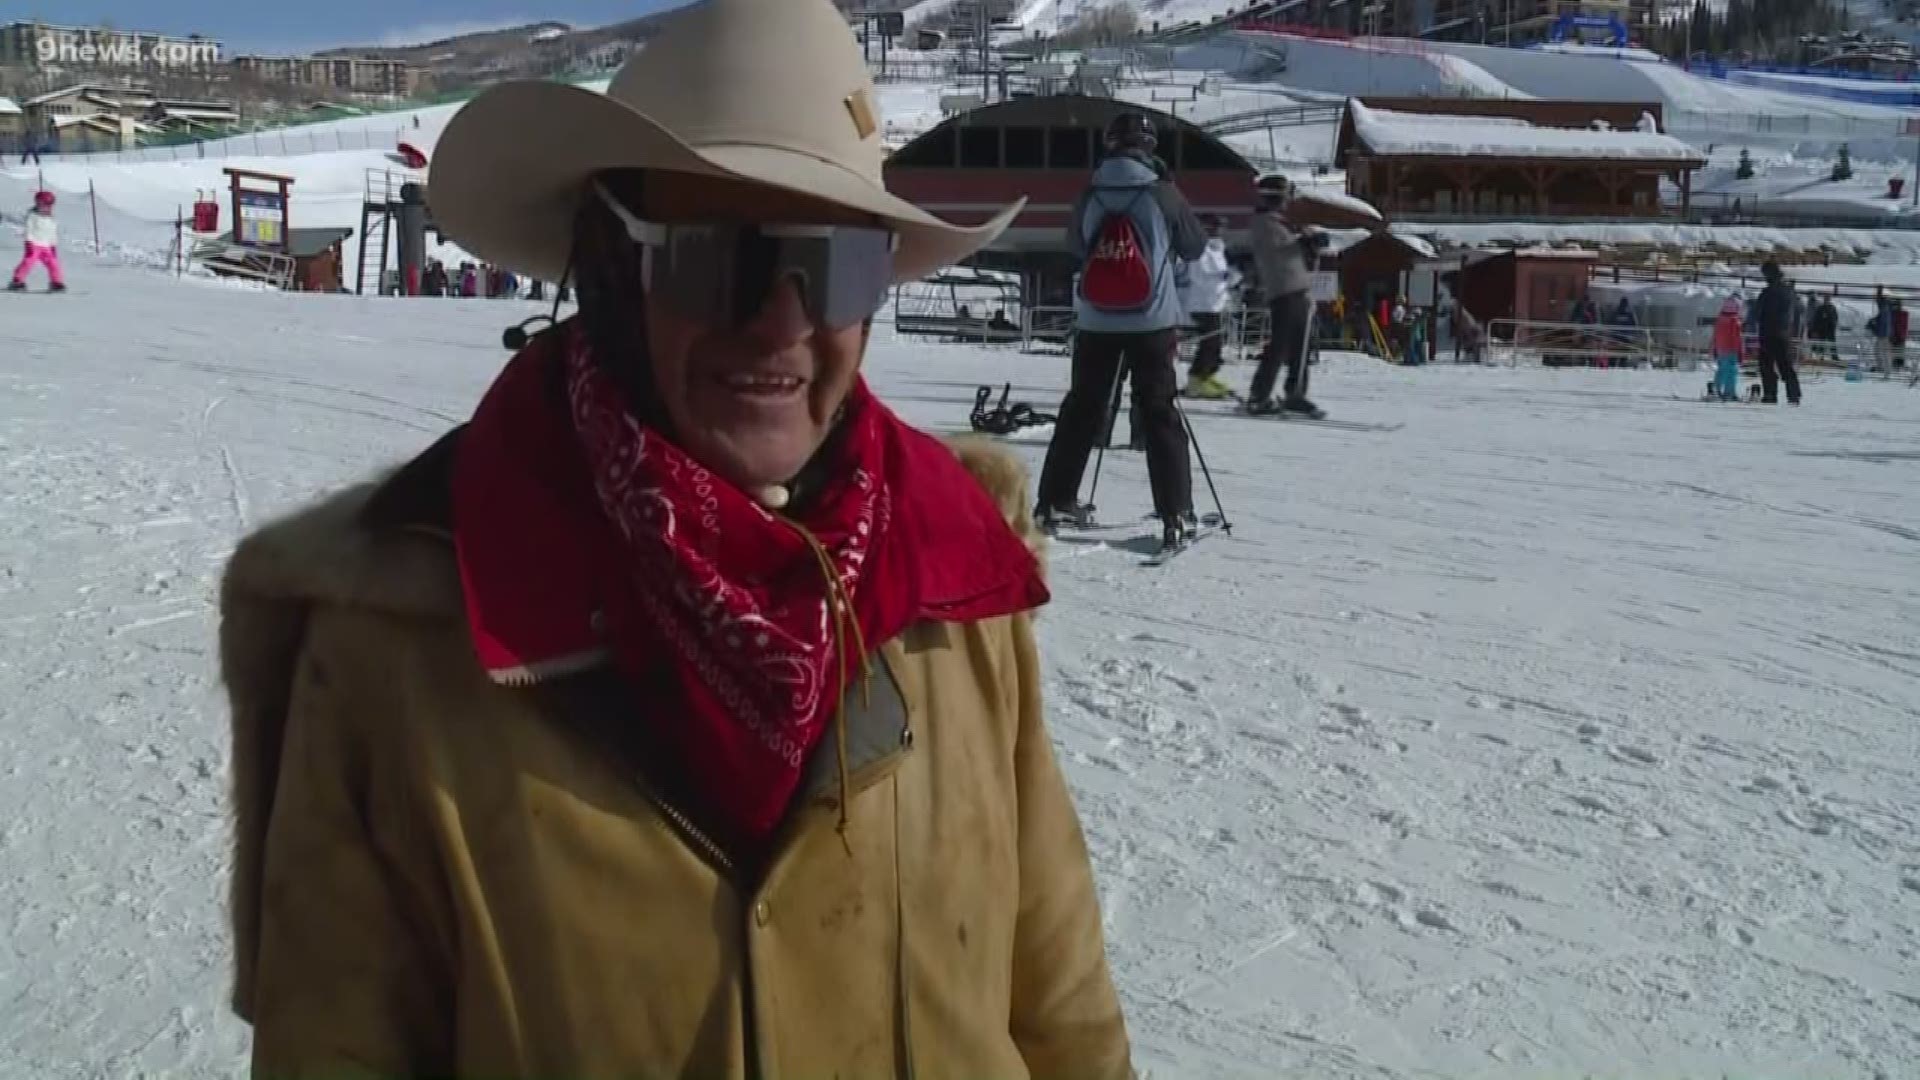 The Cowboy Downhill is a tradition that’s been going on in Steamboat Springs for 46 years.